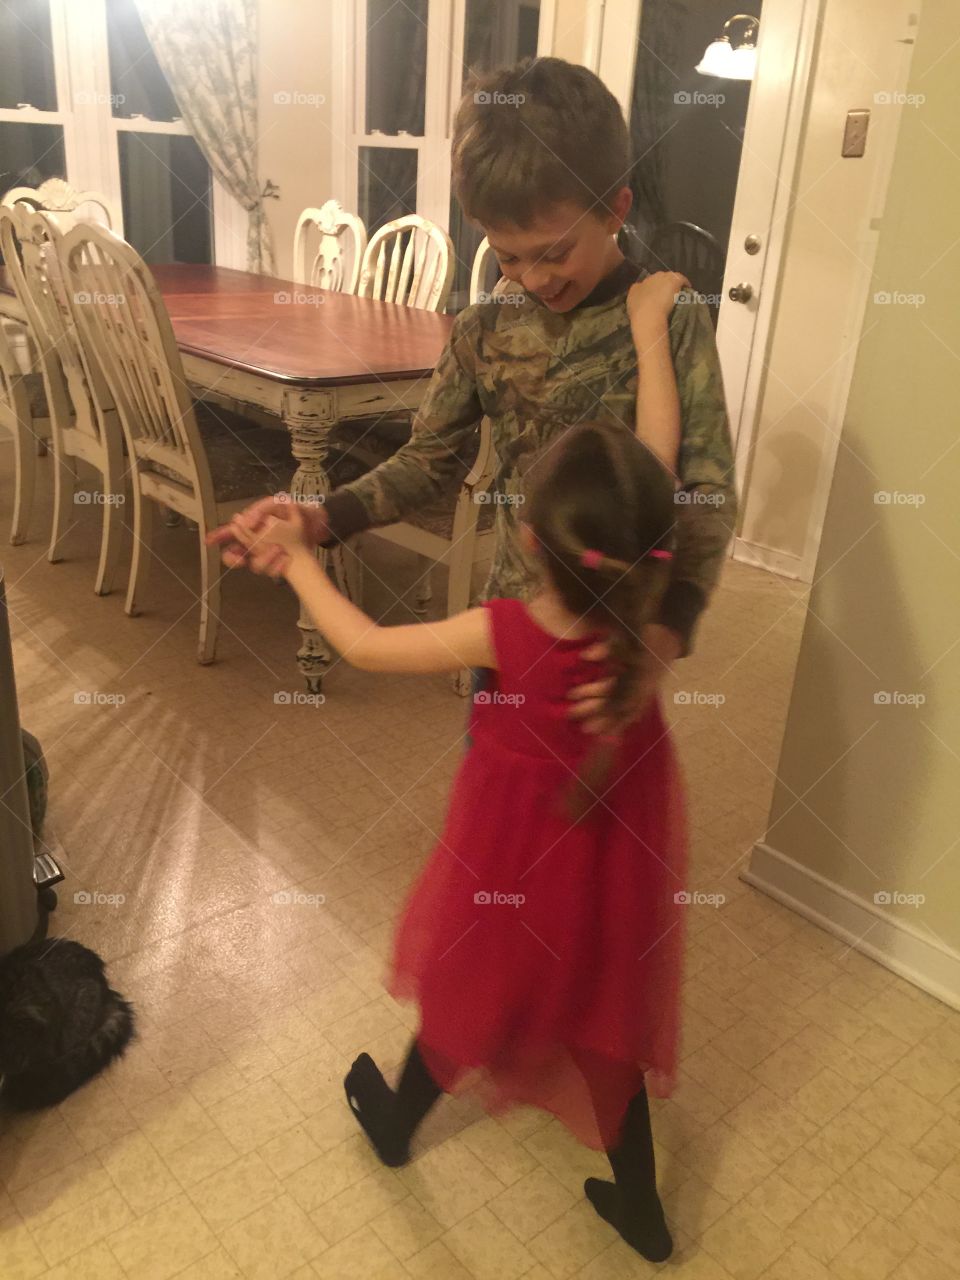 Big brother dances with little sister 